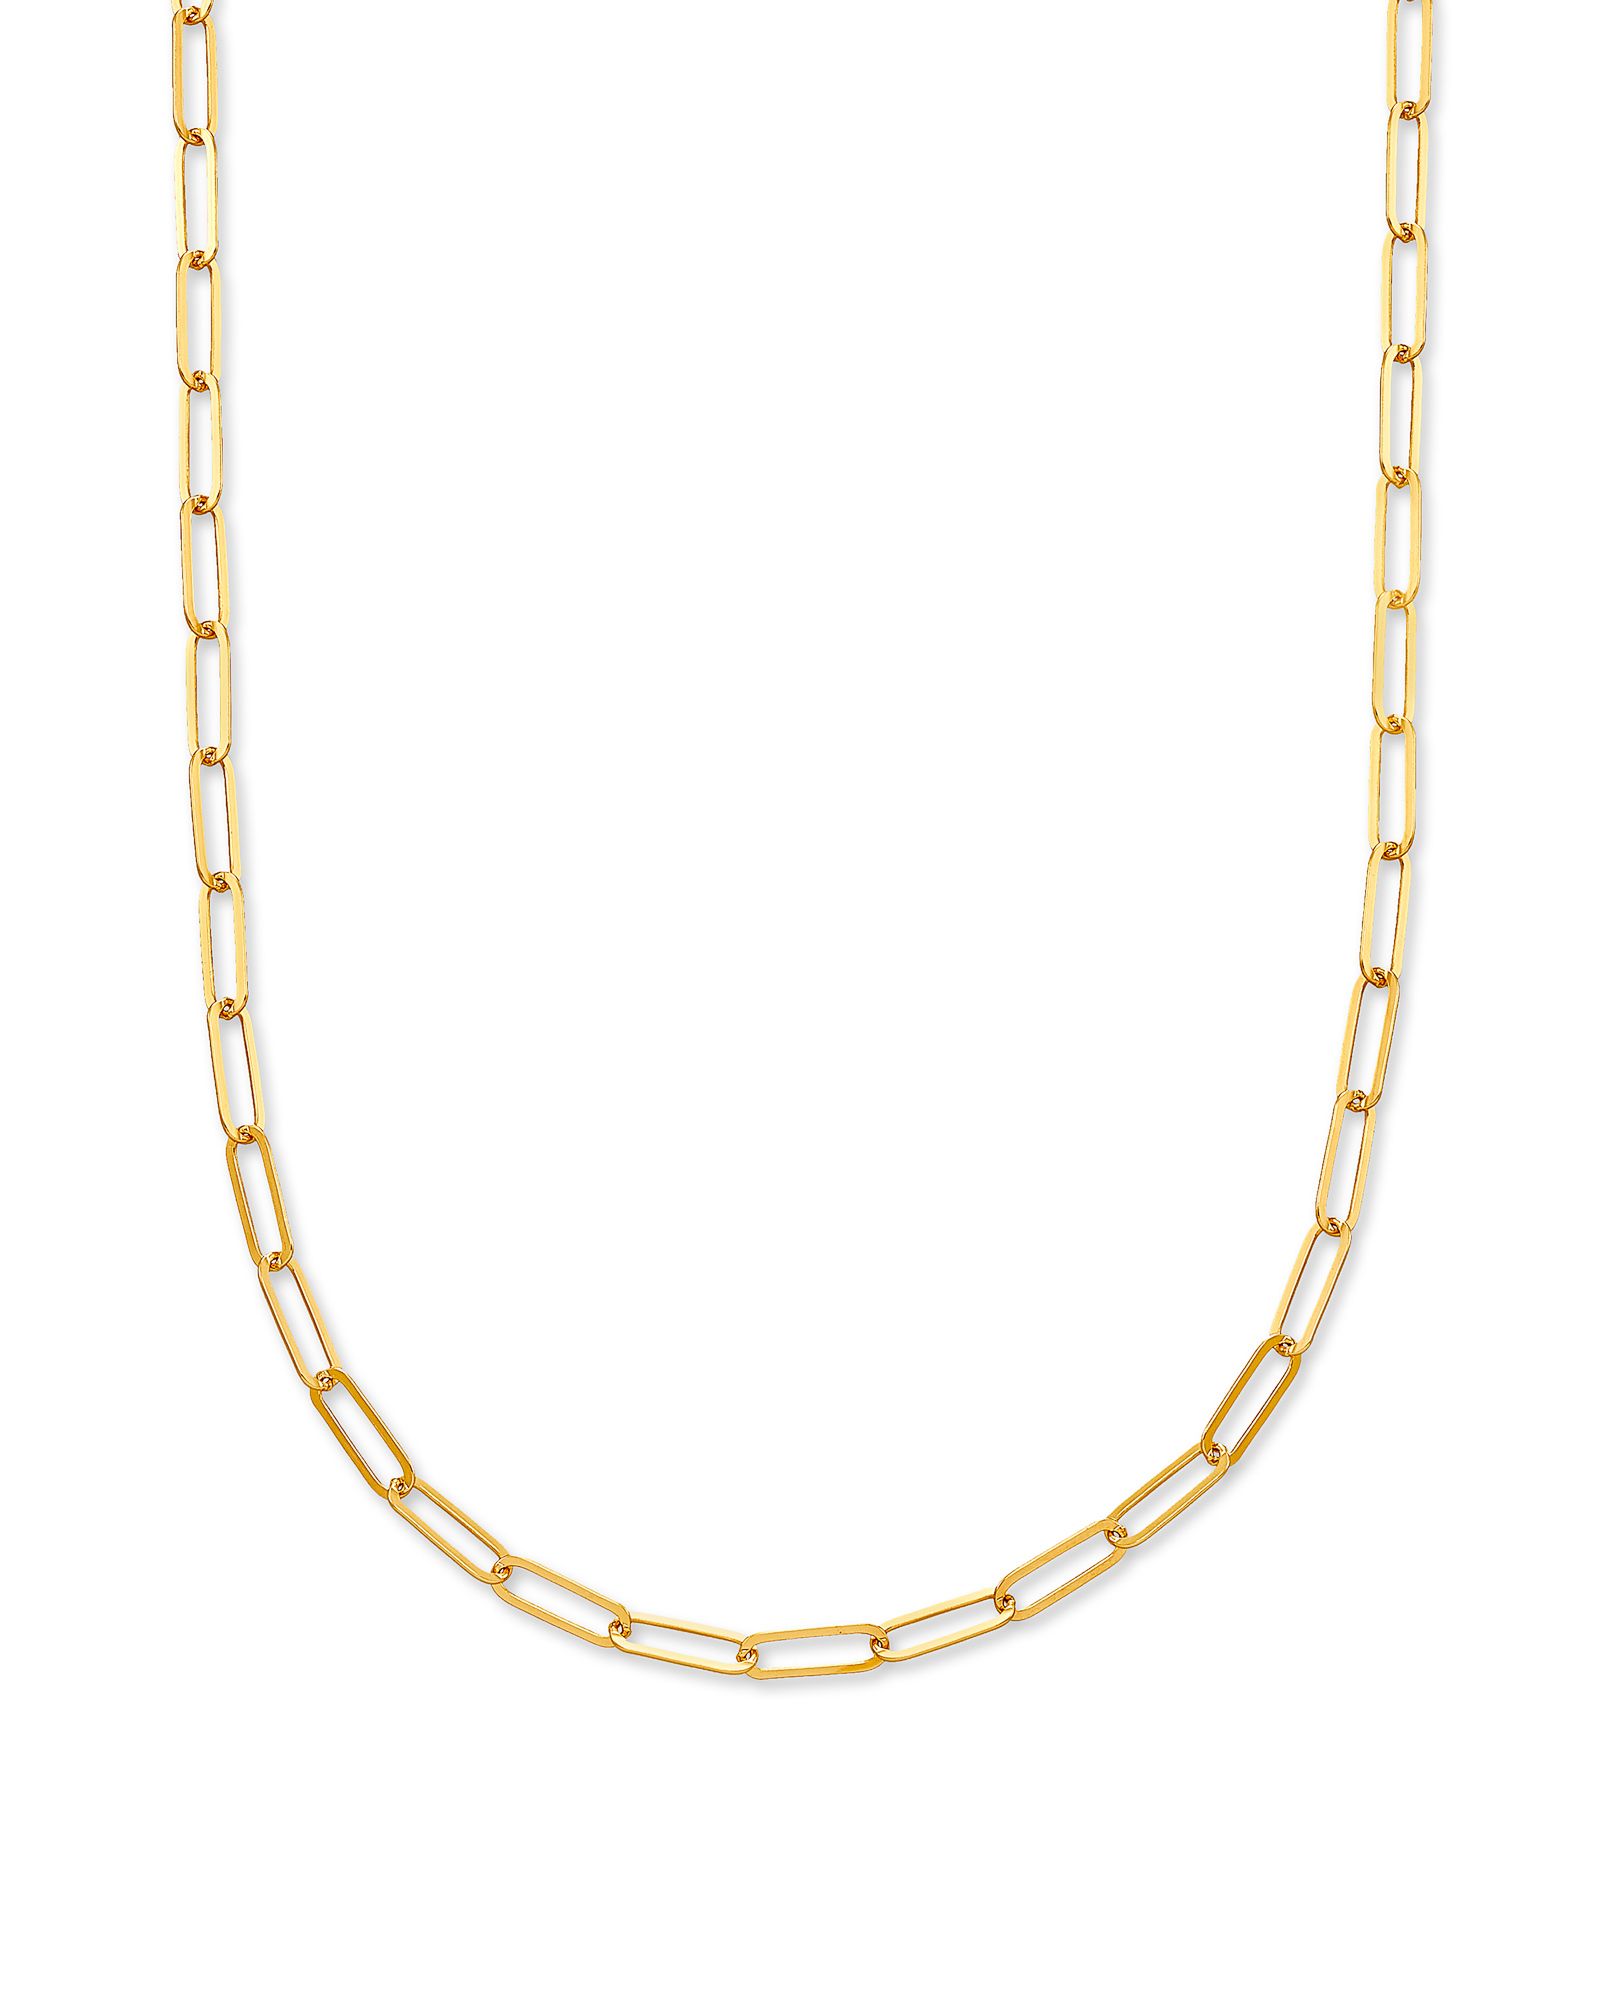 Large Paperclip Chain Necklace in 18k Gold Vermeil | Kendra Scott